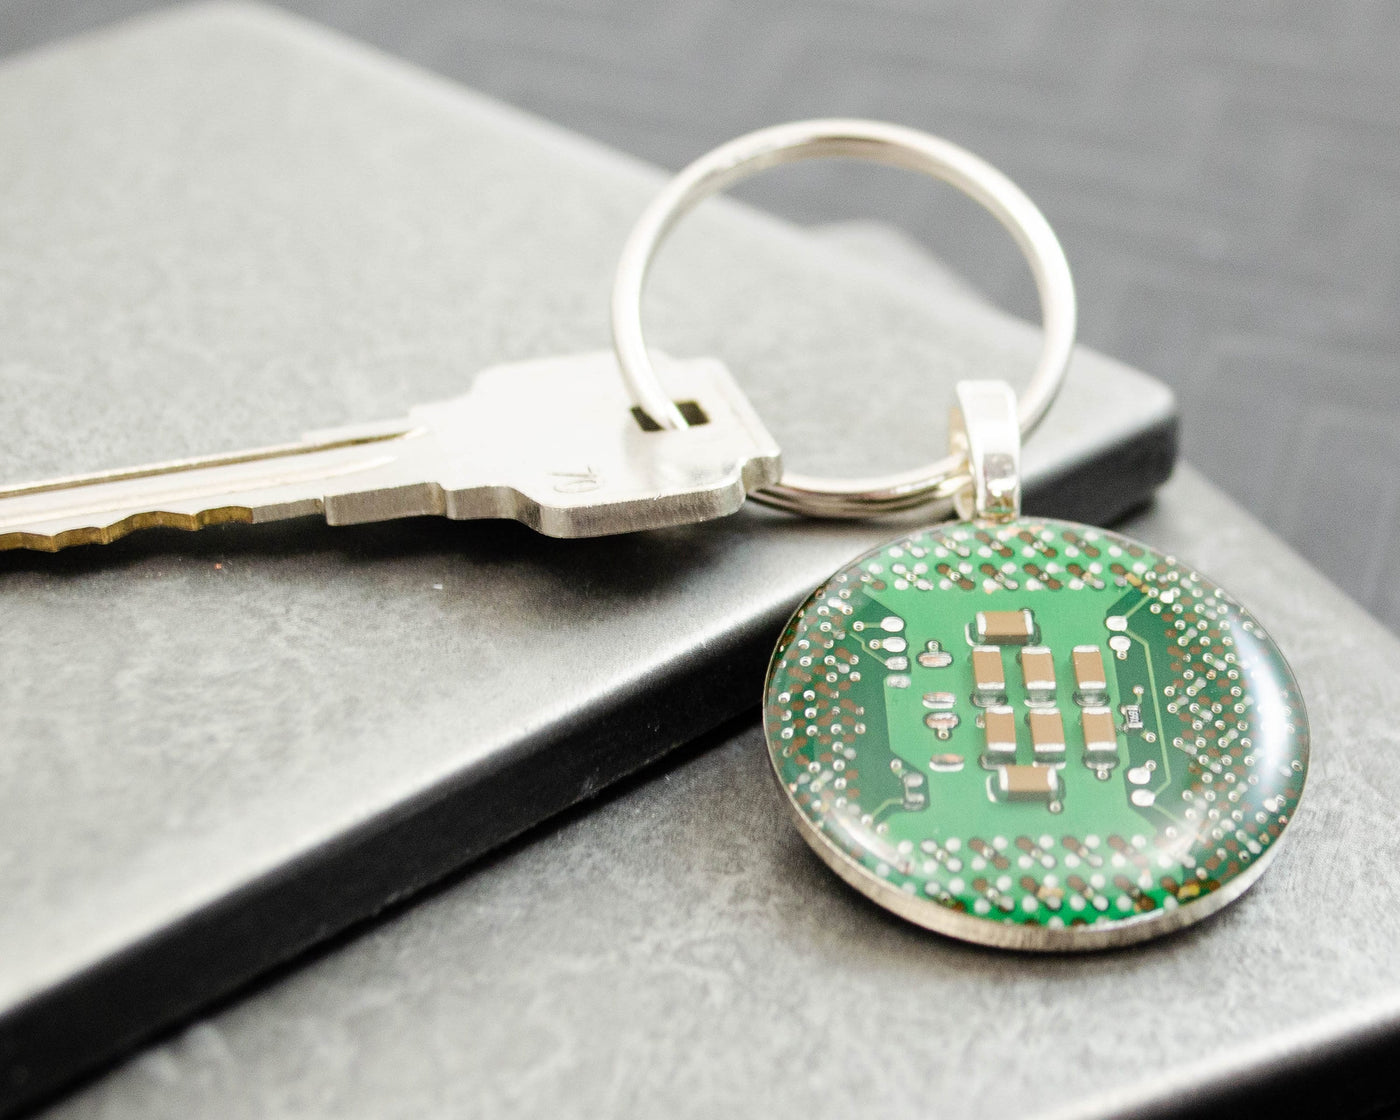 Green Circuit Board Keychain, Wearable Technology, Computer Engineer Gift, Industrial Chic, Computer Science Gift, Techie Gift, Geek Gift